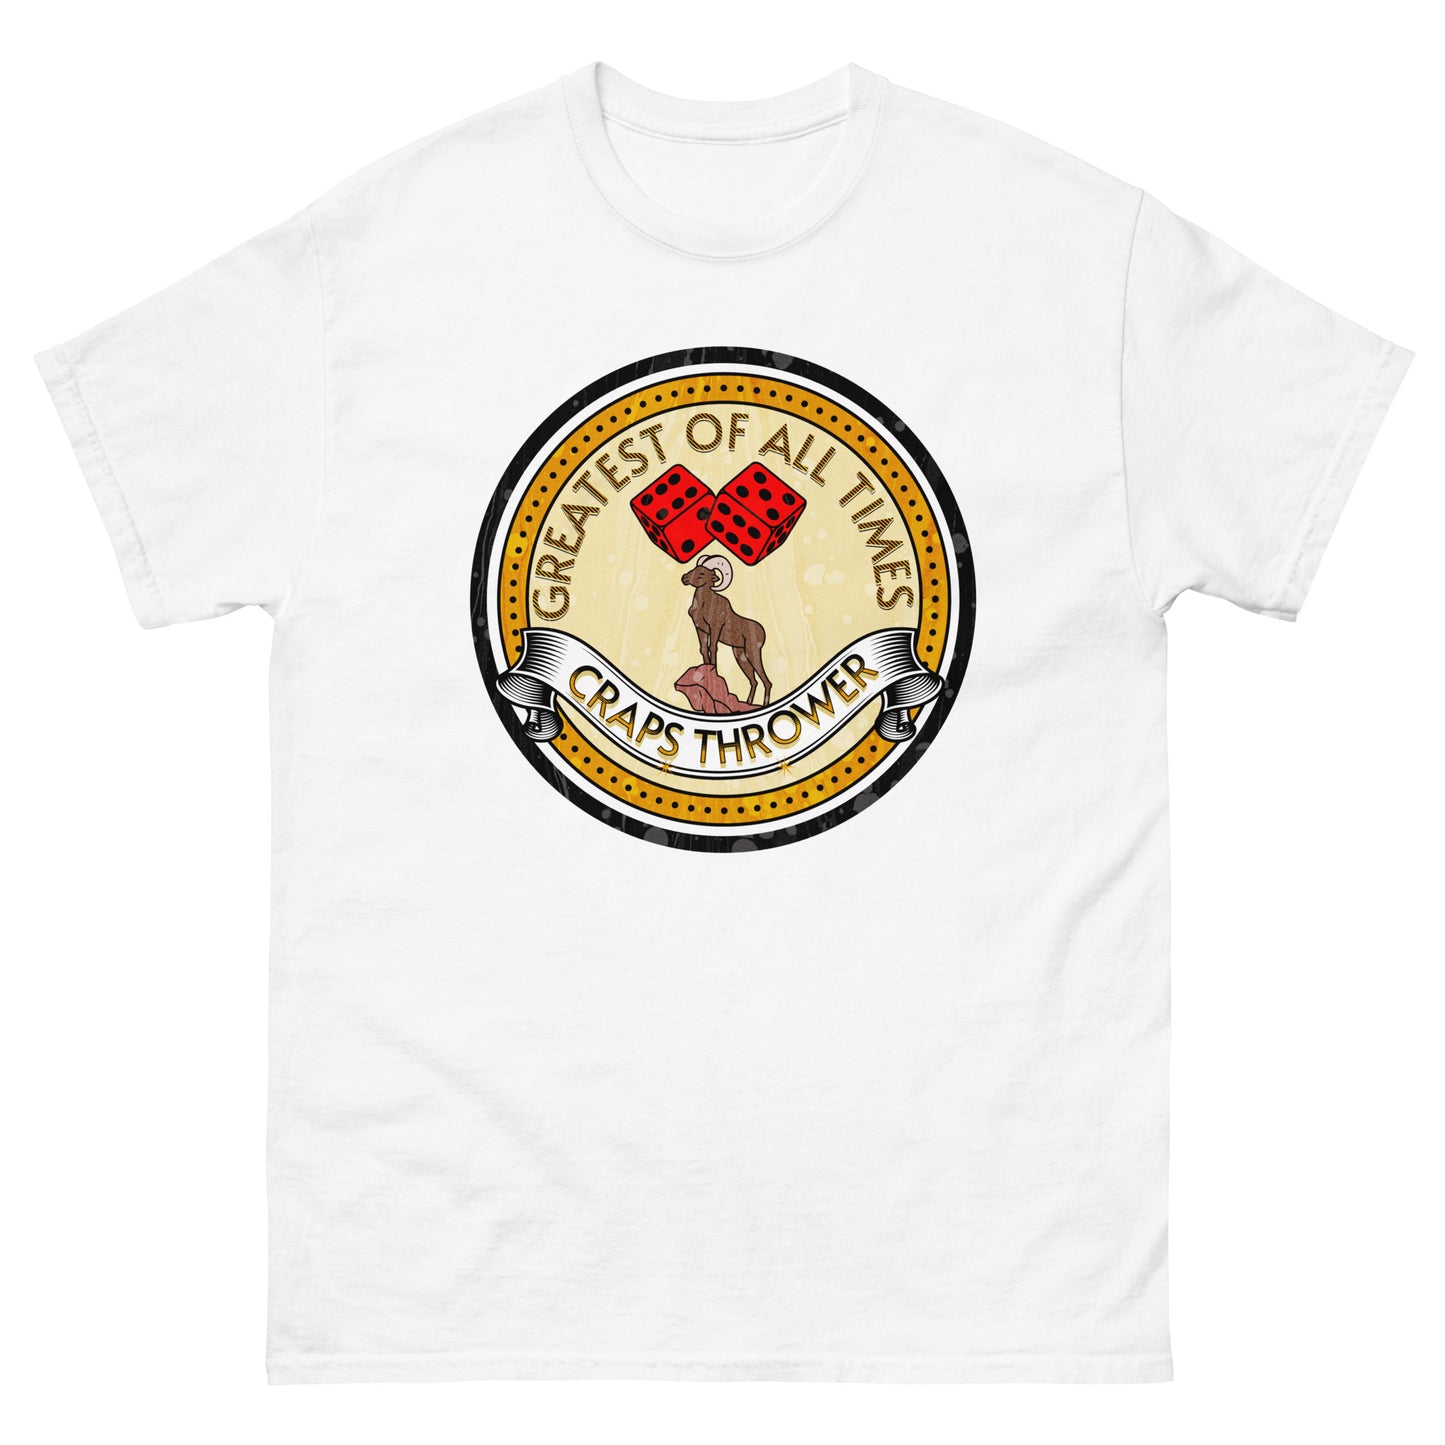 Greatest of all time craps thrower craps and dice shirt